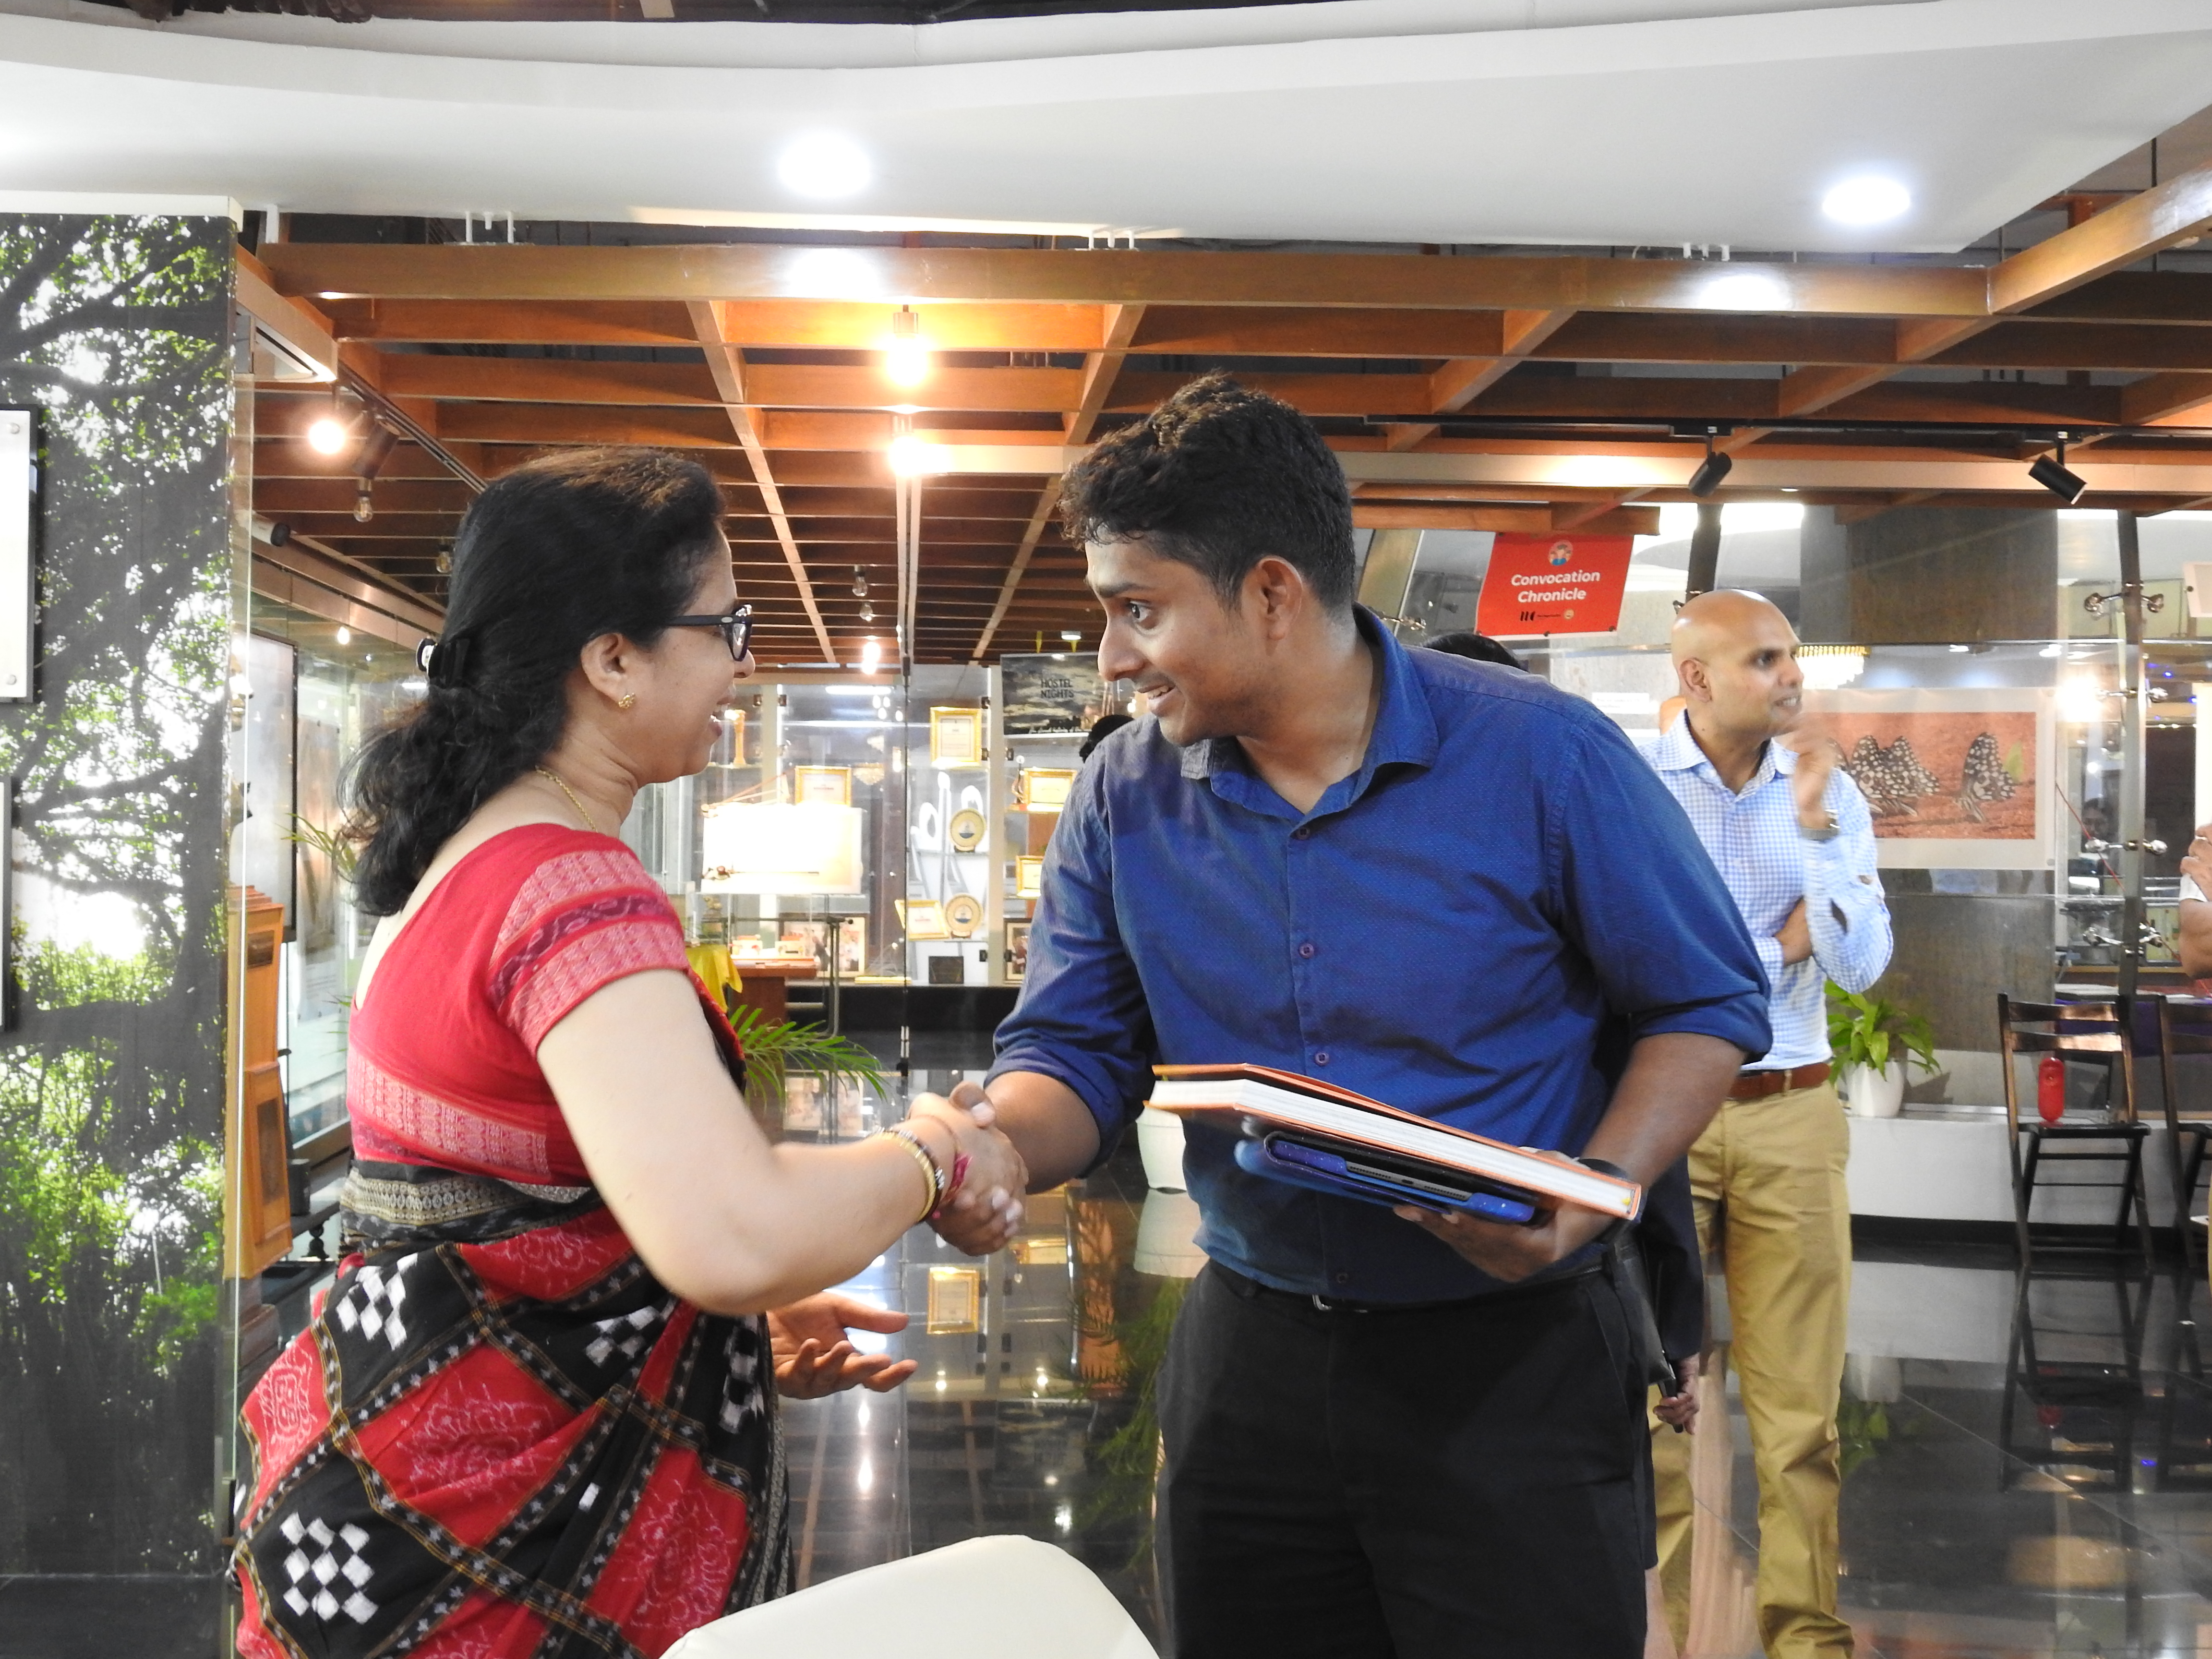 Ms. Mamata Dash (Senior Project Officer of Heritage Centre) with Dr. Jithin Sam Varghese